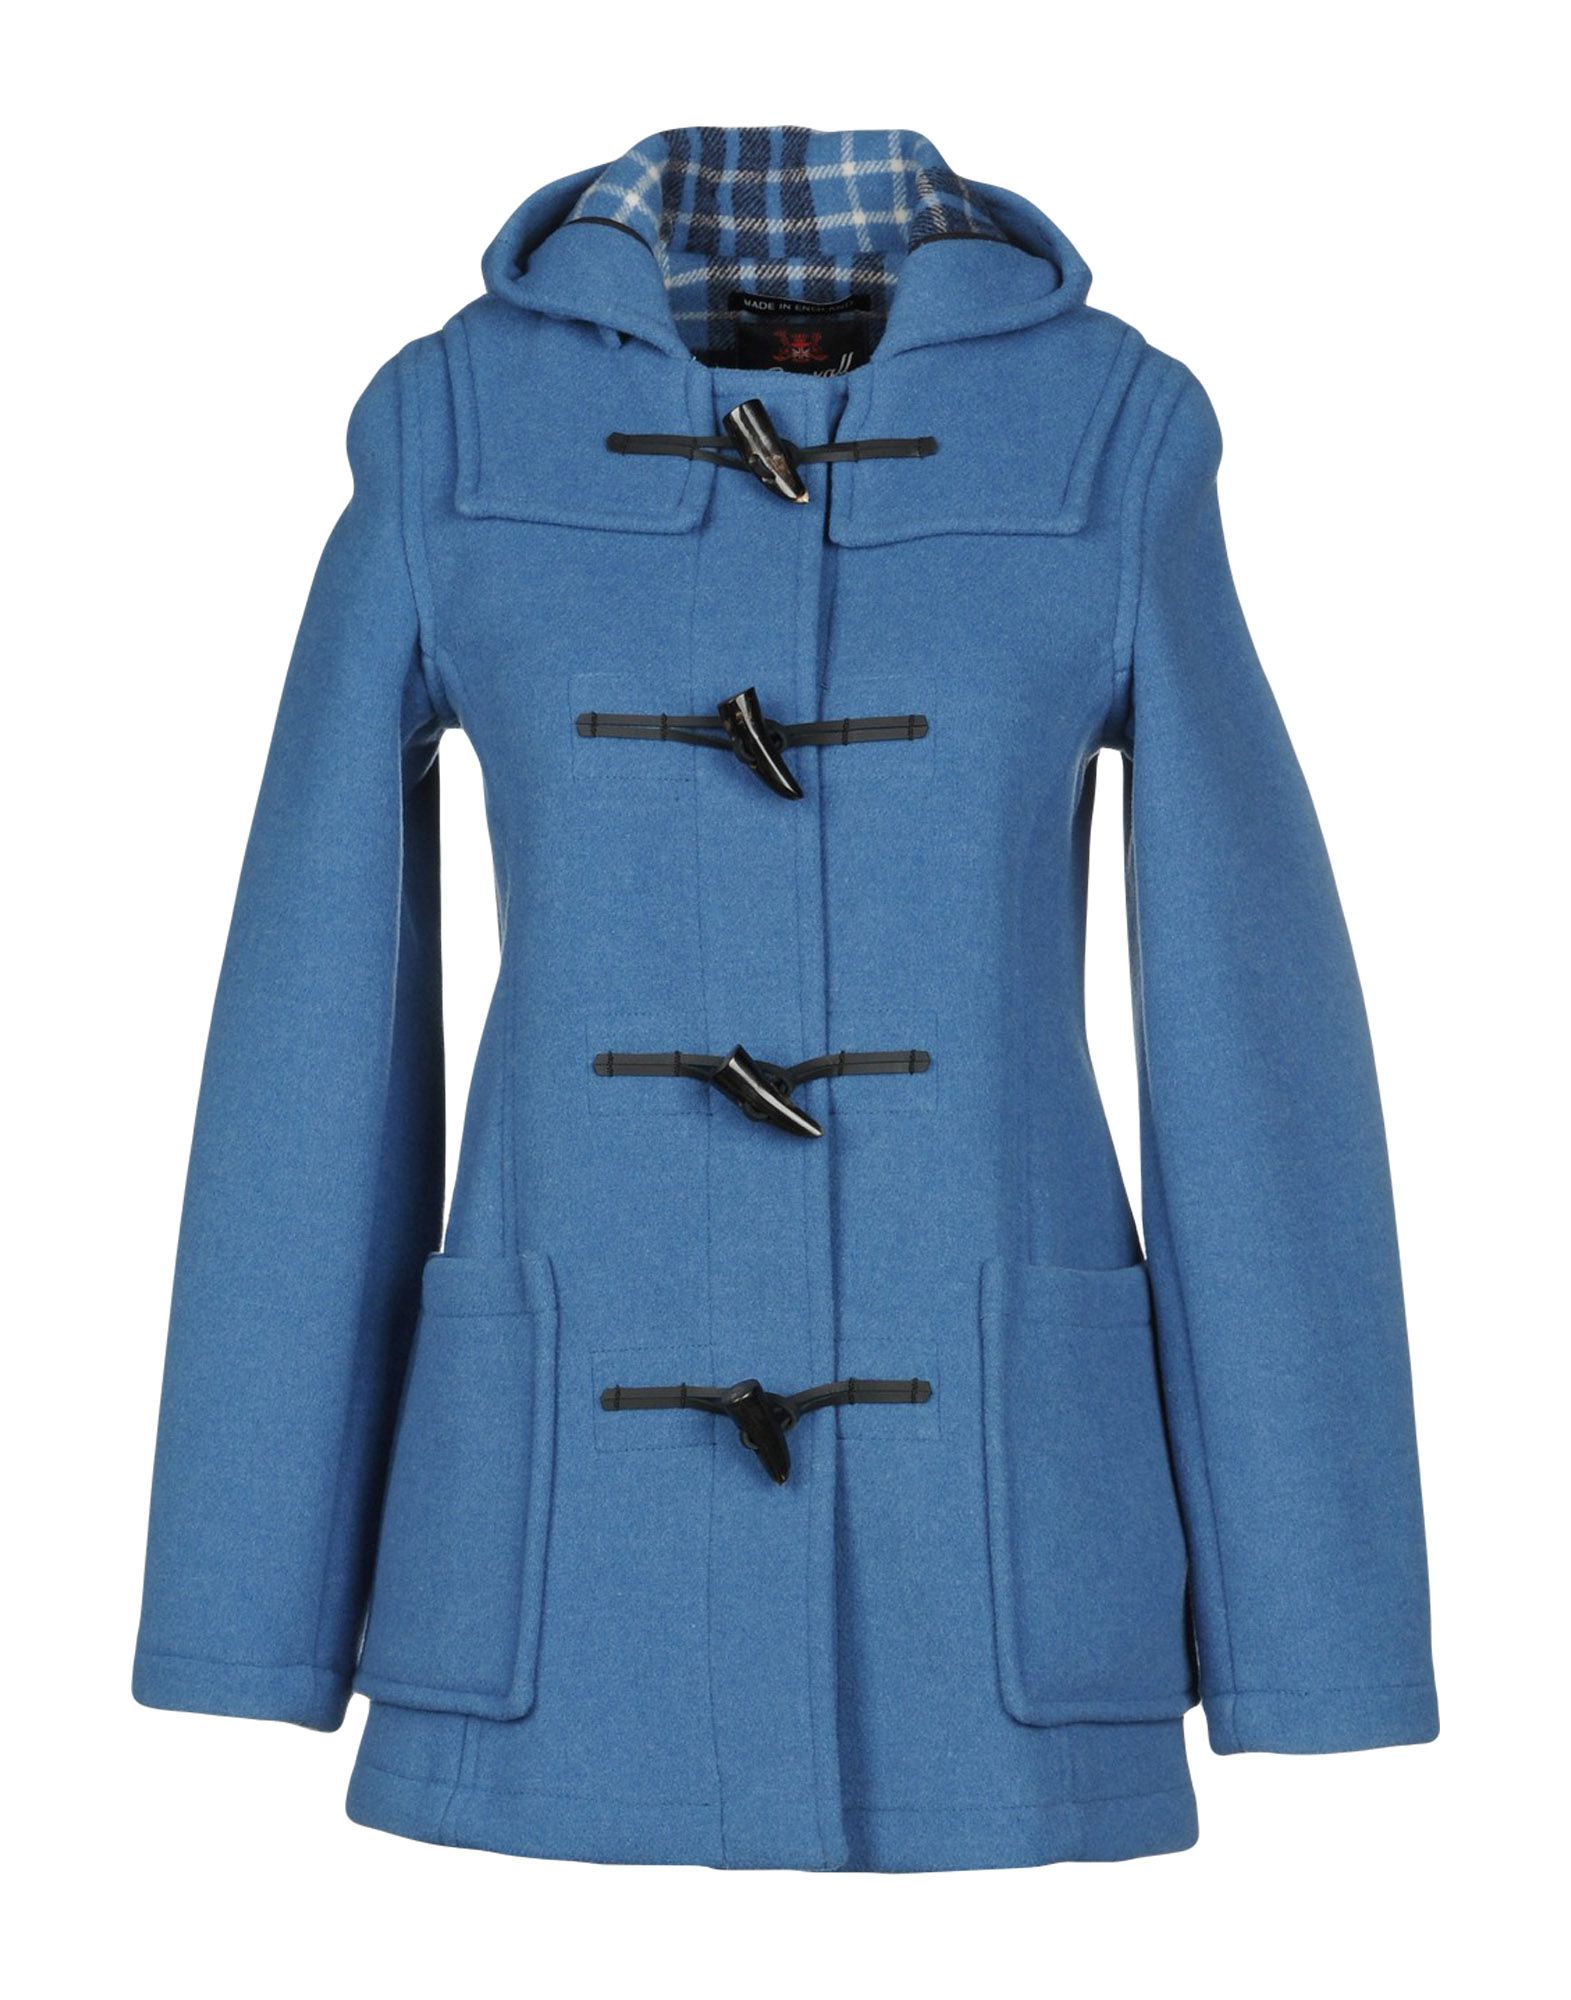 GLOVERALL COAT,41641399GN 7